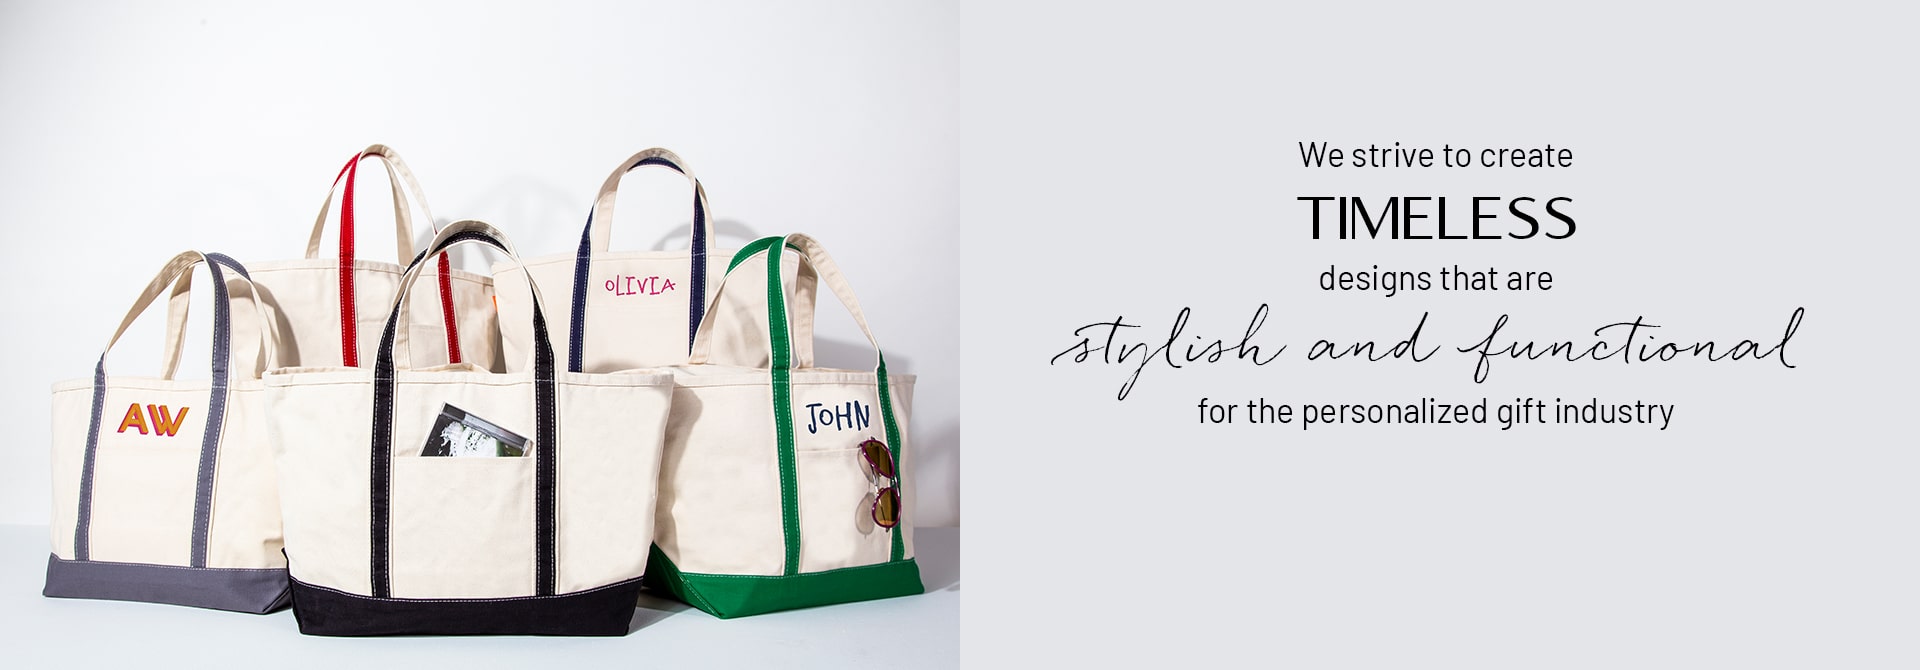 1 set Initial Canvas Tote Bag, Personalized Present Bag, Clutch